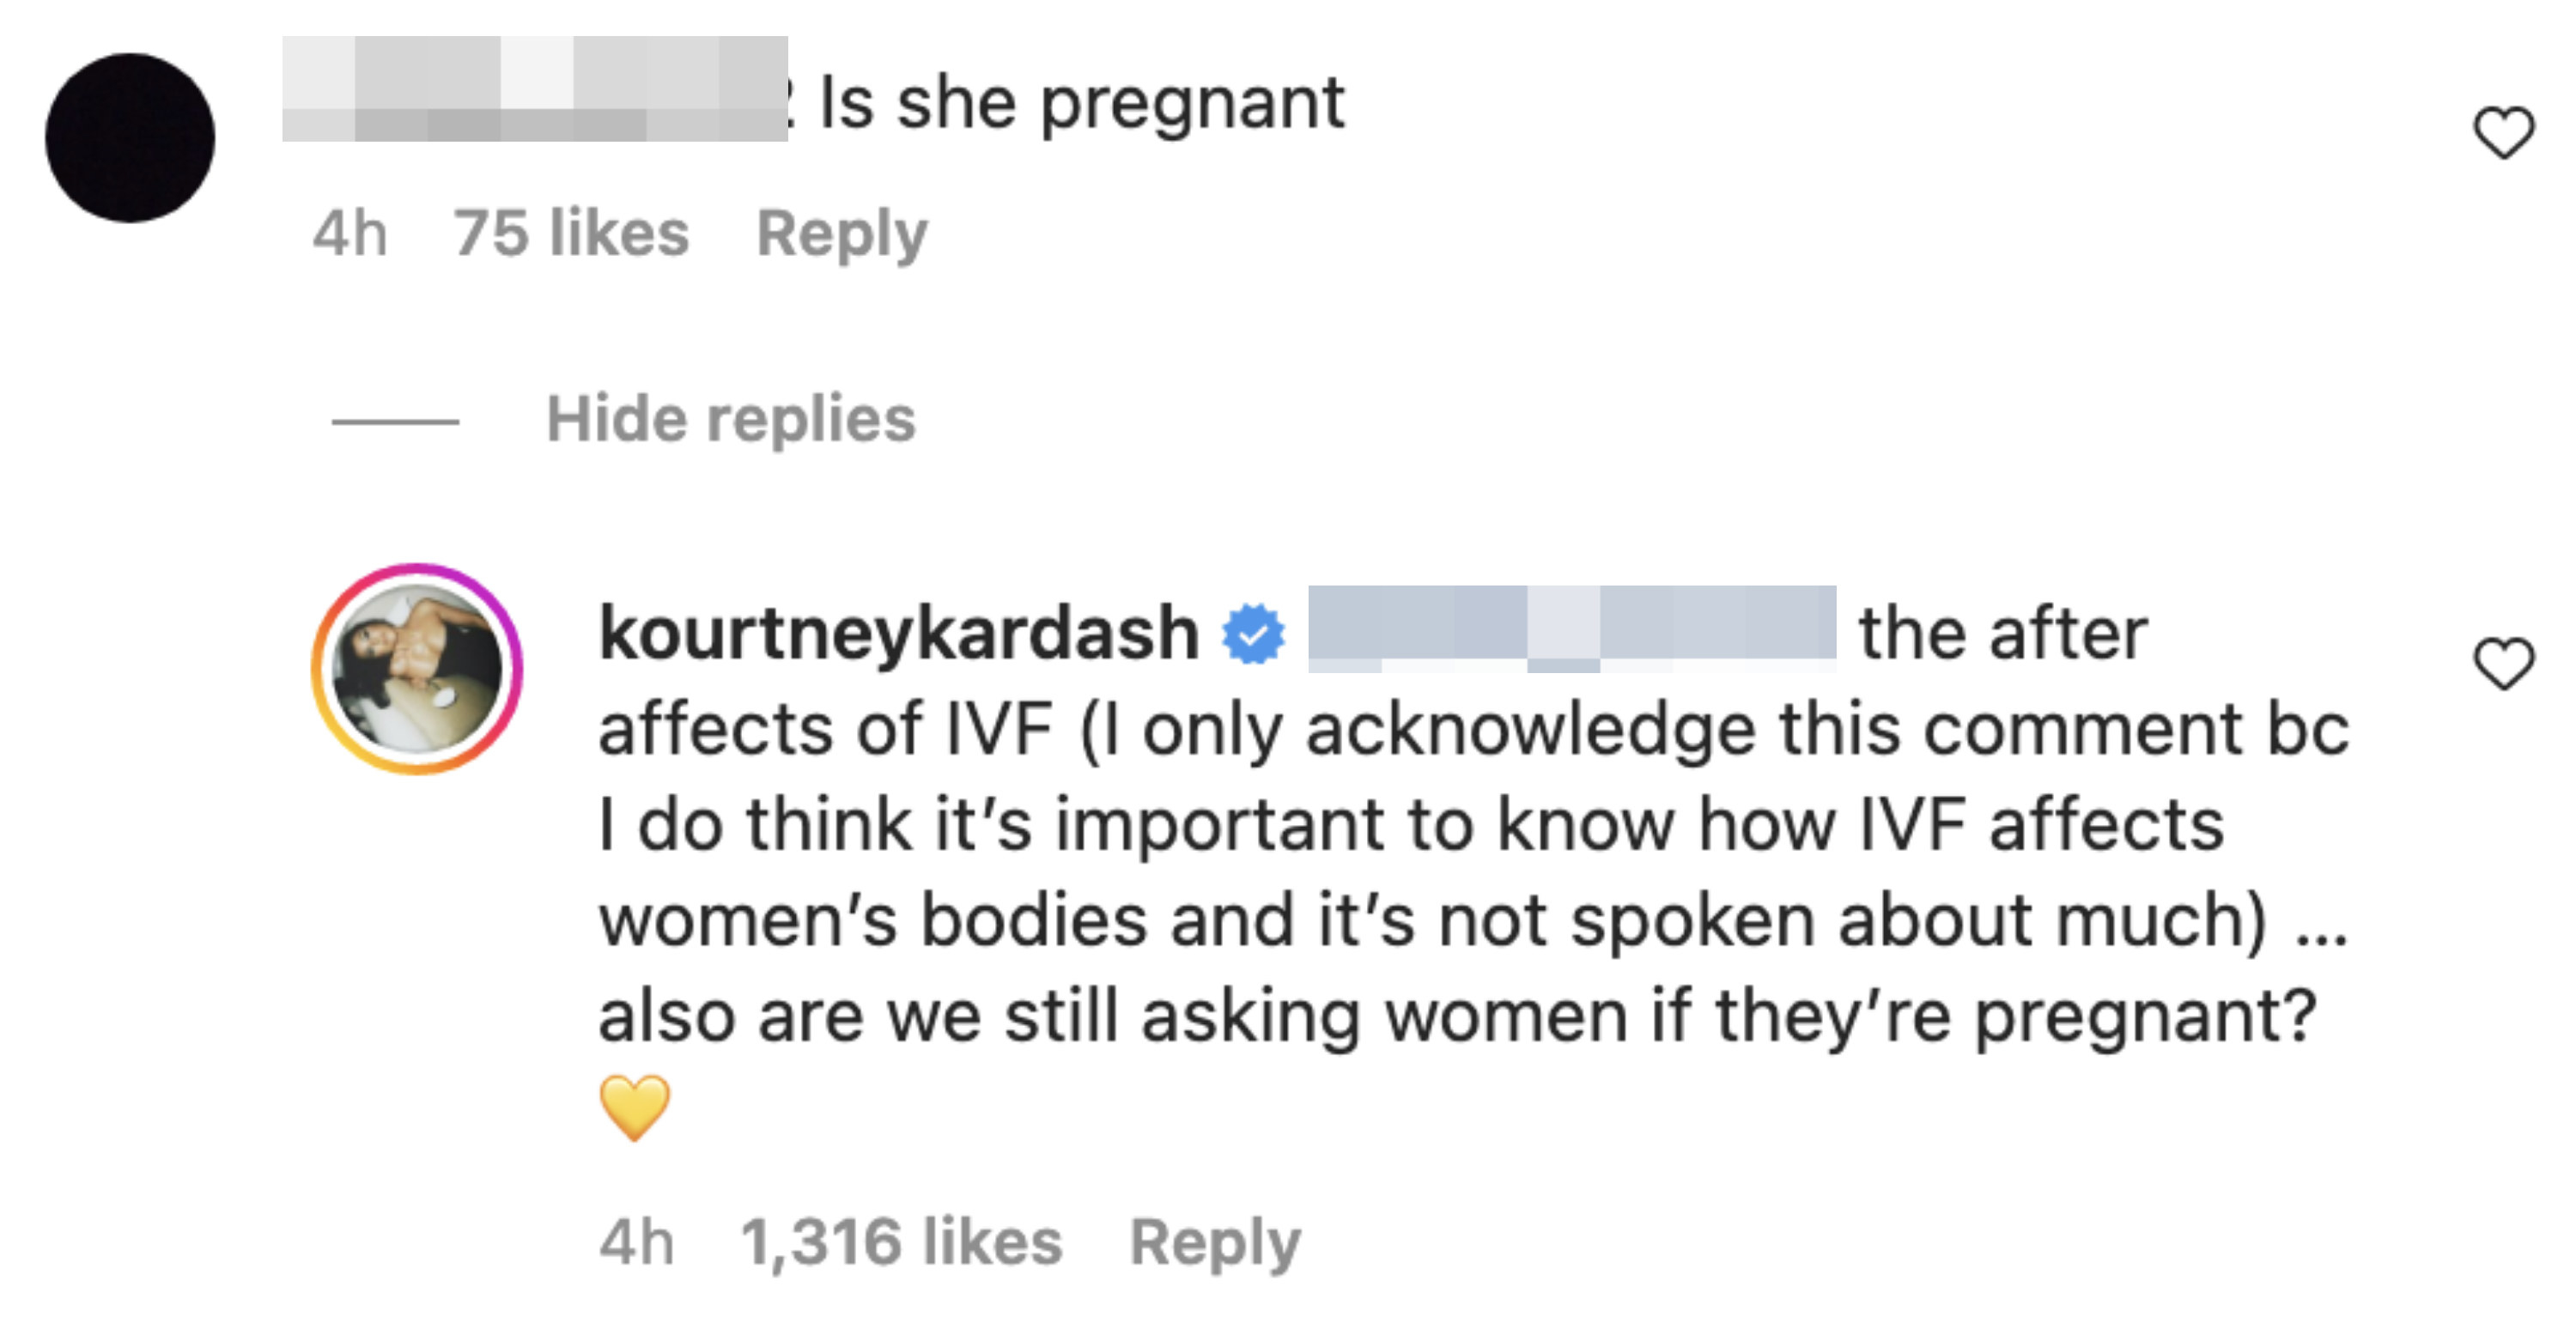 Kourtney responding by referring to &quot;the after affects of IVF&quot; and saying &quot;it&#x27;s important to know how IVF affects women&#x27;s bodies&quot; and &quot;are we still asking women if they&#x27;re pregnant?&quot;